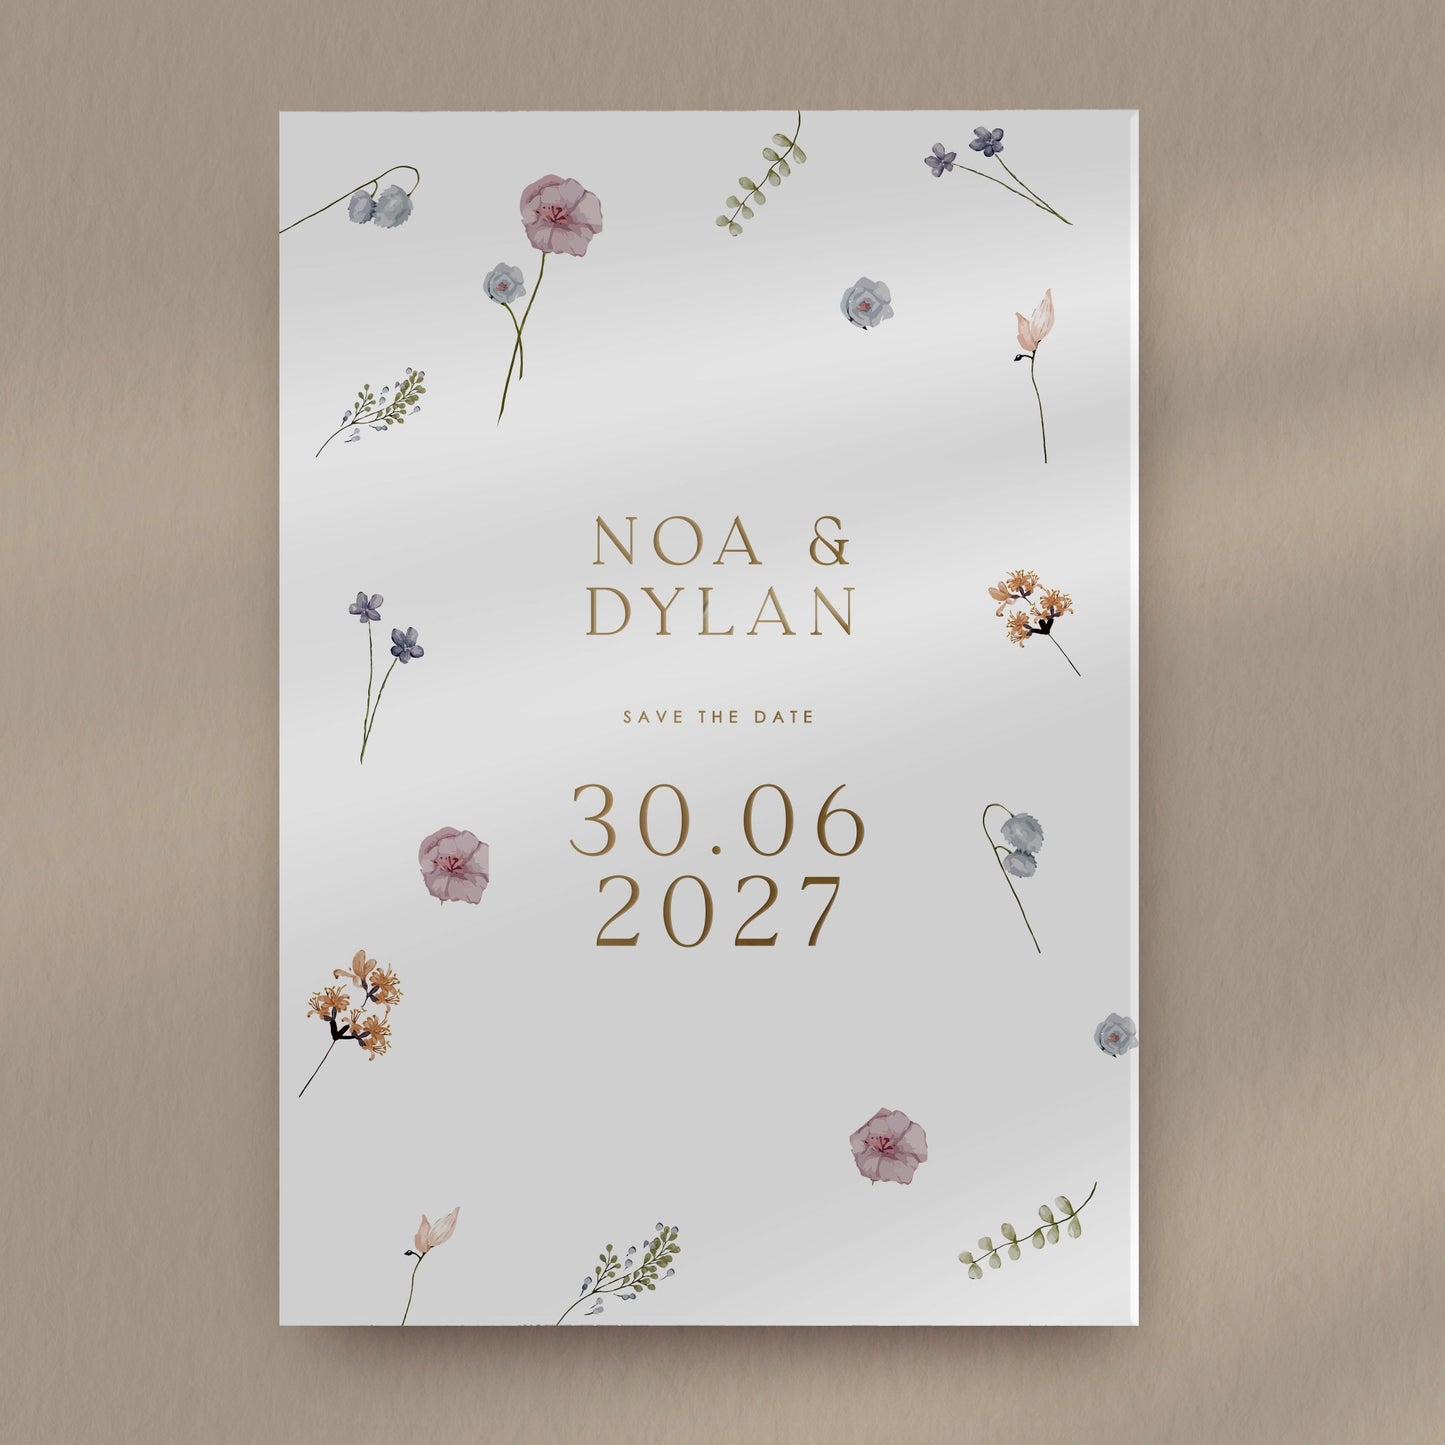 Save The Date Sample  Ivy and Gold Wedding Stationery Noa  